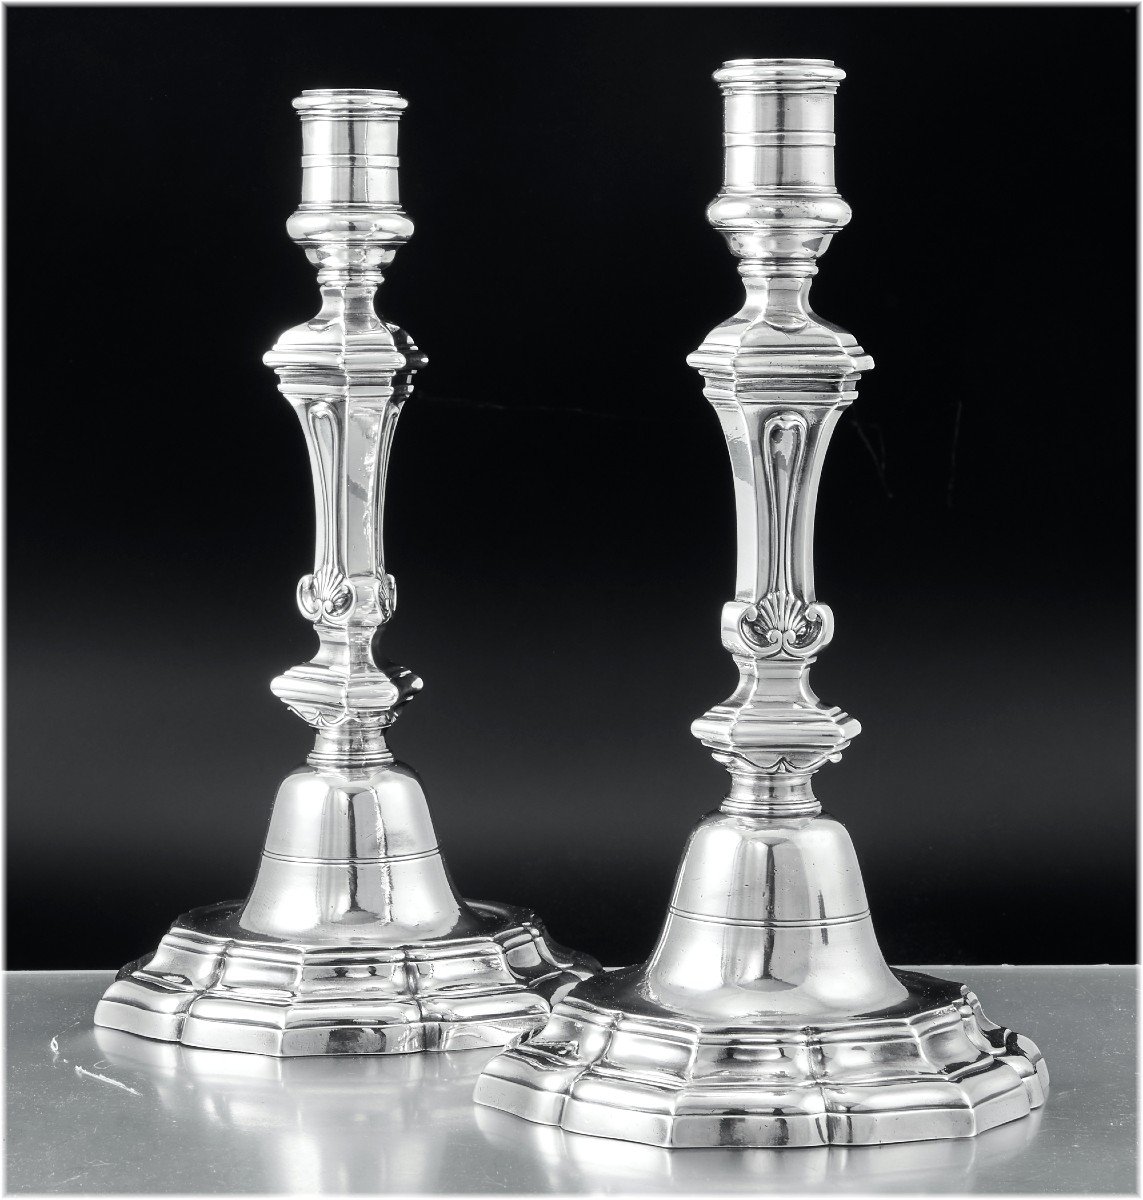 Claude Genu : Extremely Rare 18th Century Pair Of Solid Silver Candlesticks  Paris 1749